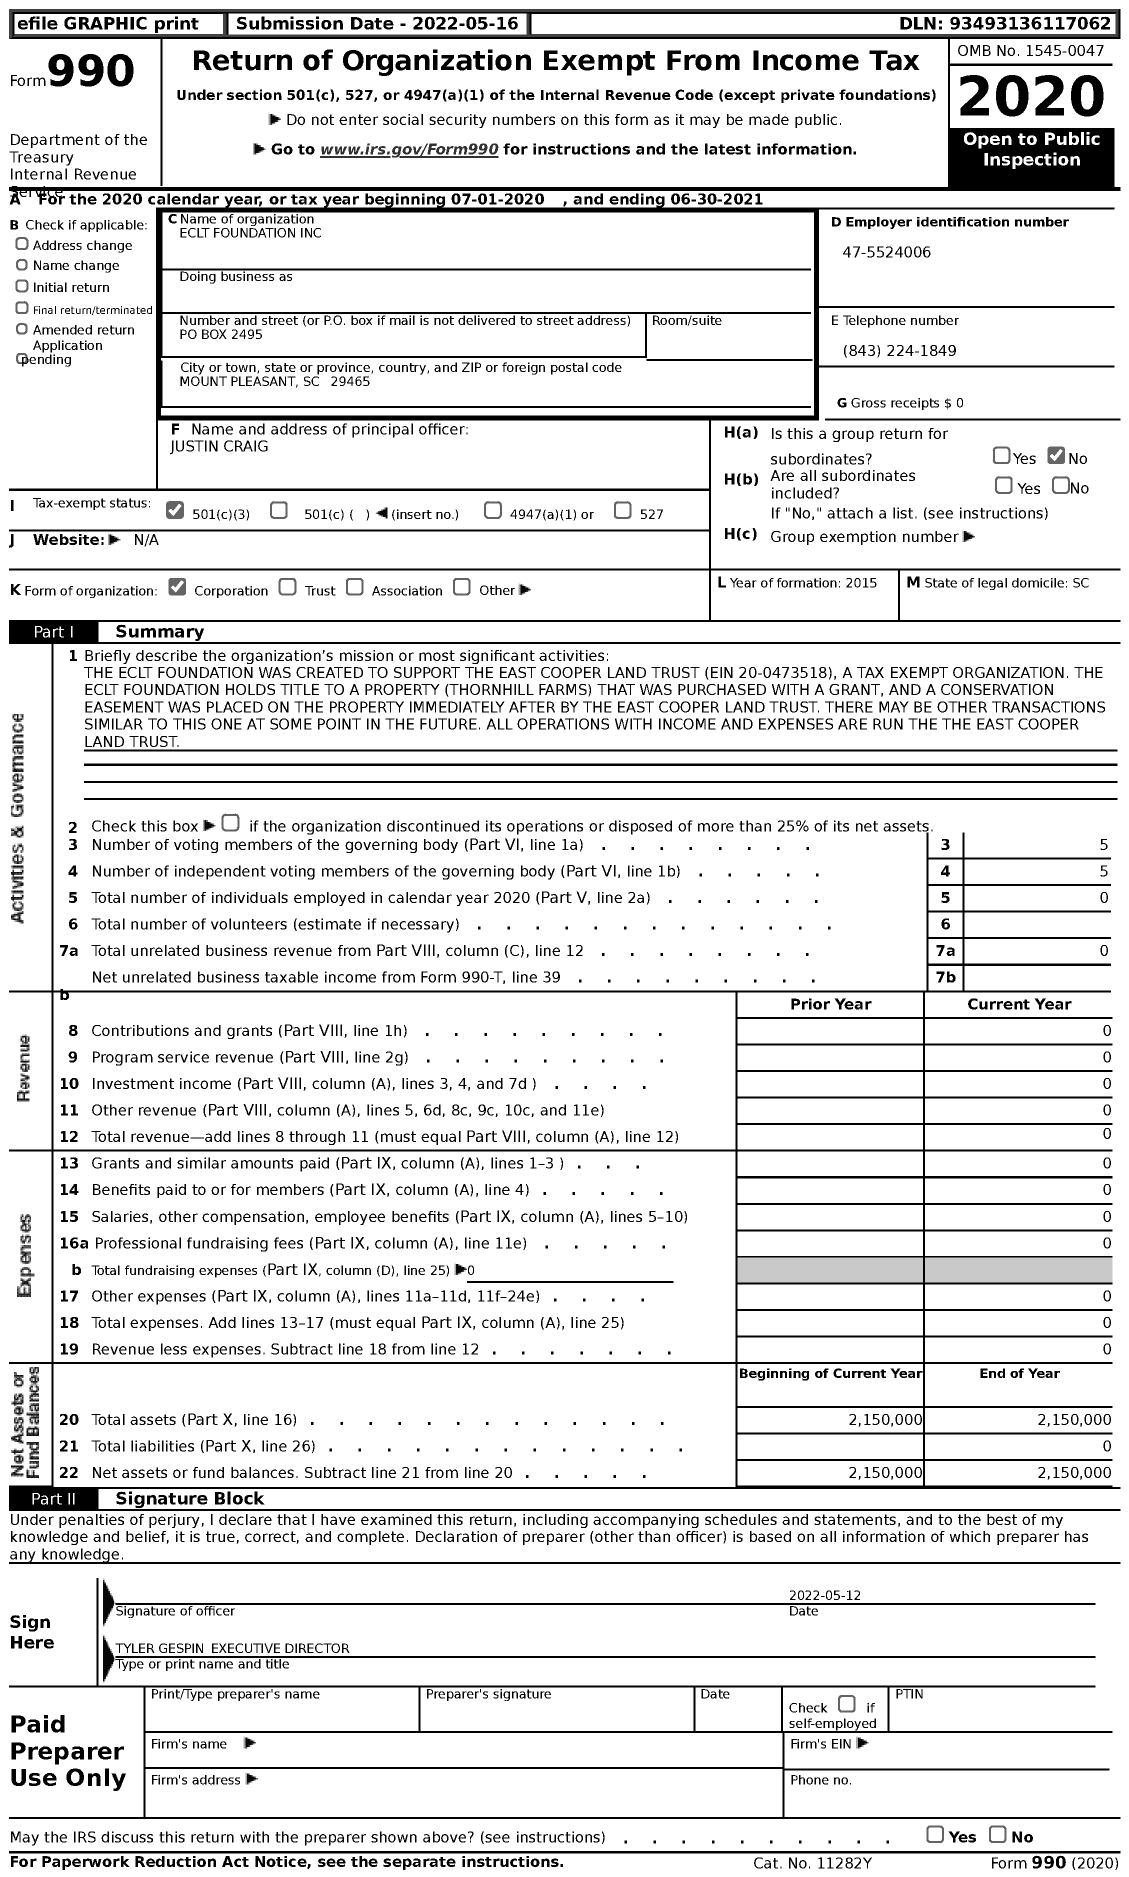 Image of first page of 2020 Form 990 for Eclt Foundation